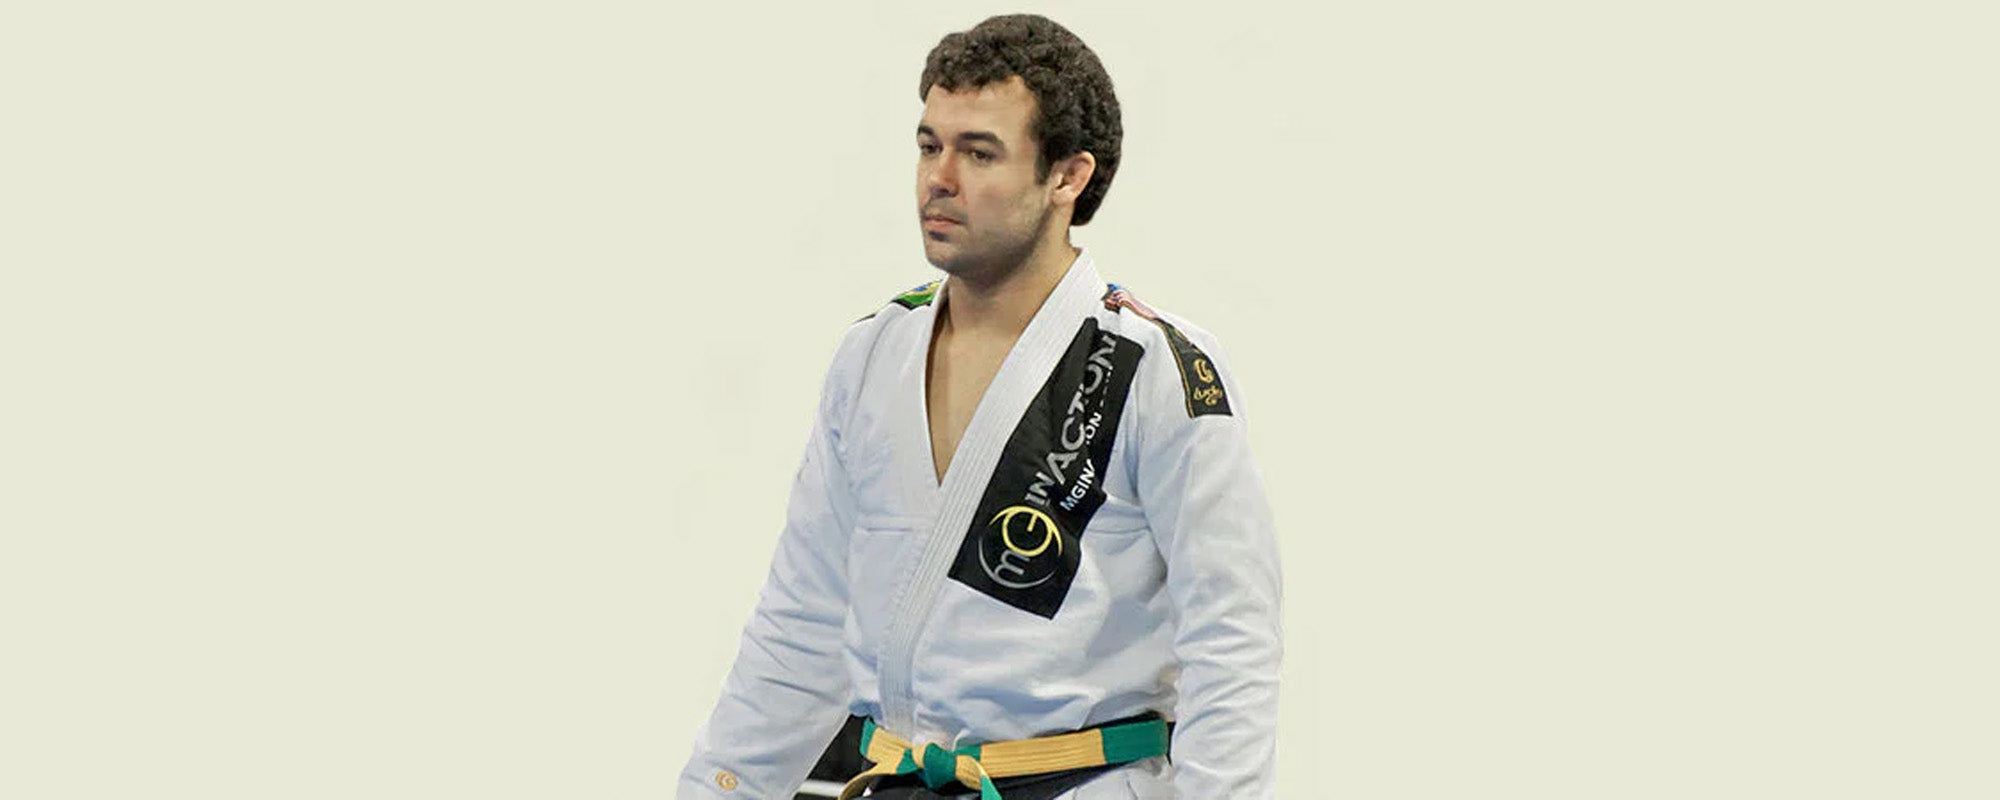 Marcelo Garcia, The ADCC GOAT (Greatest of All Times)